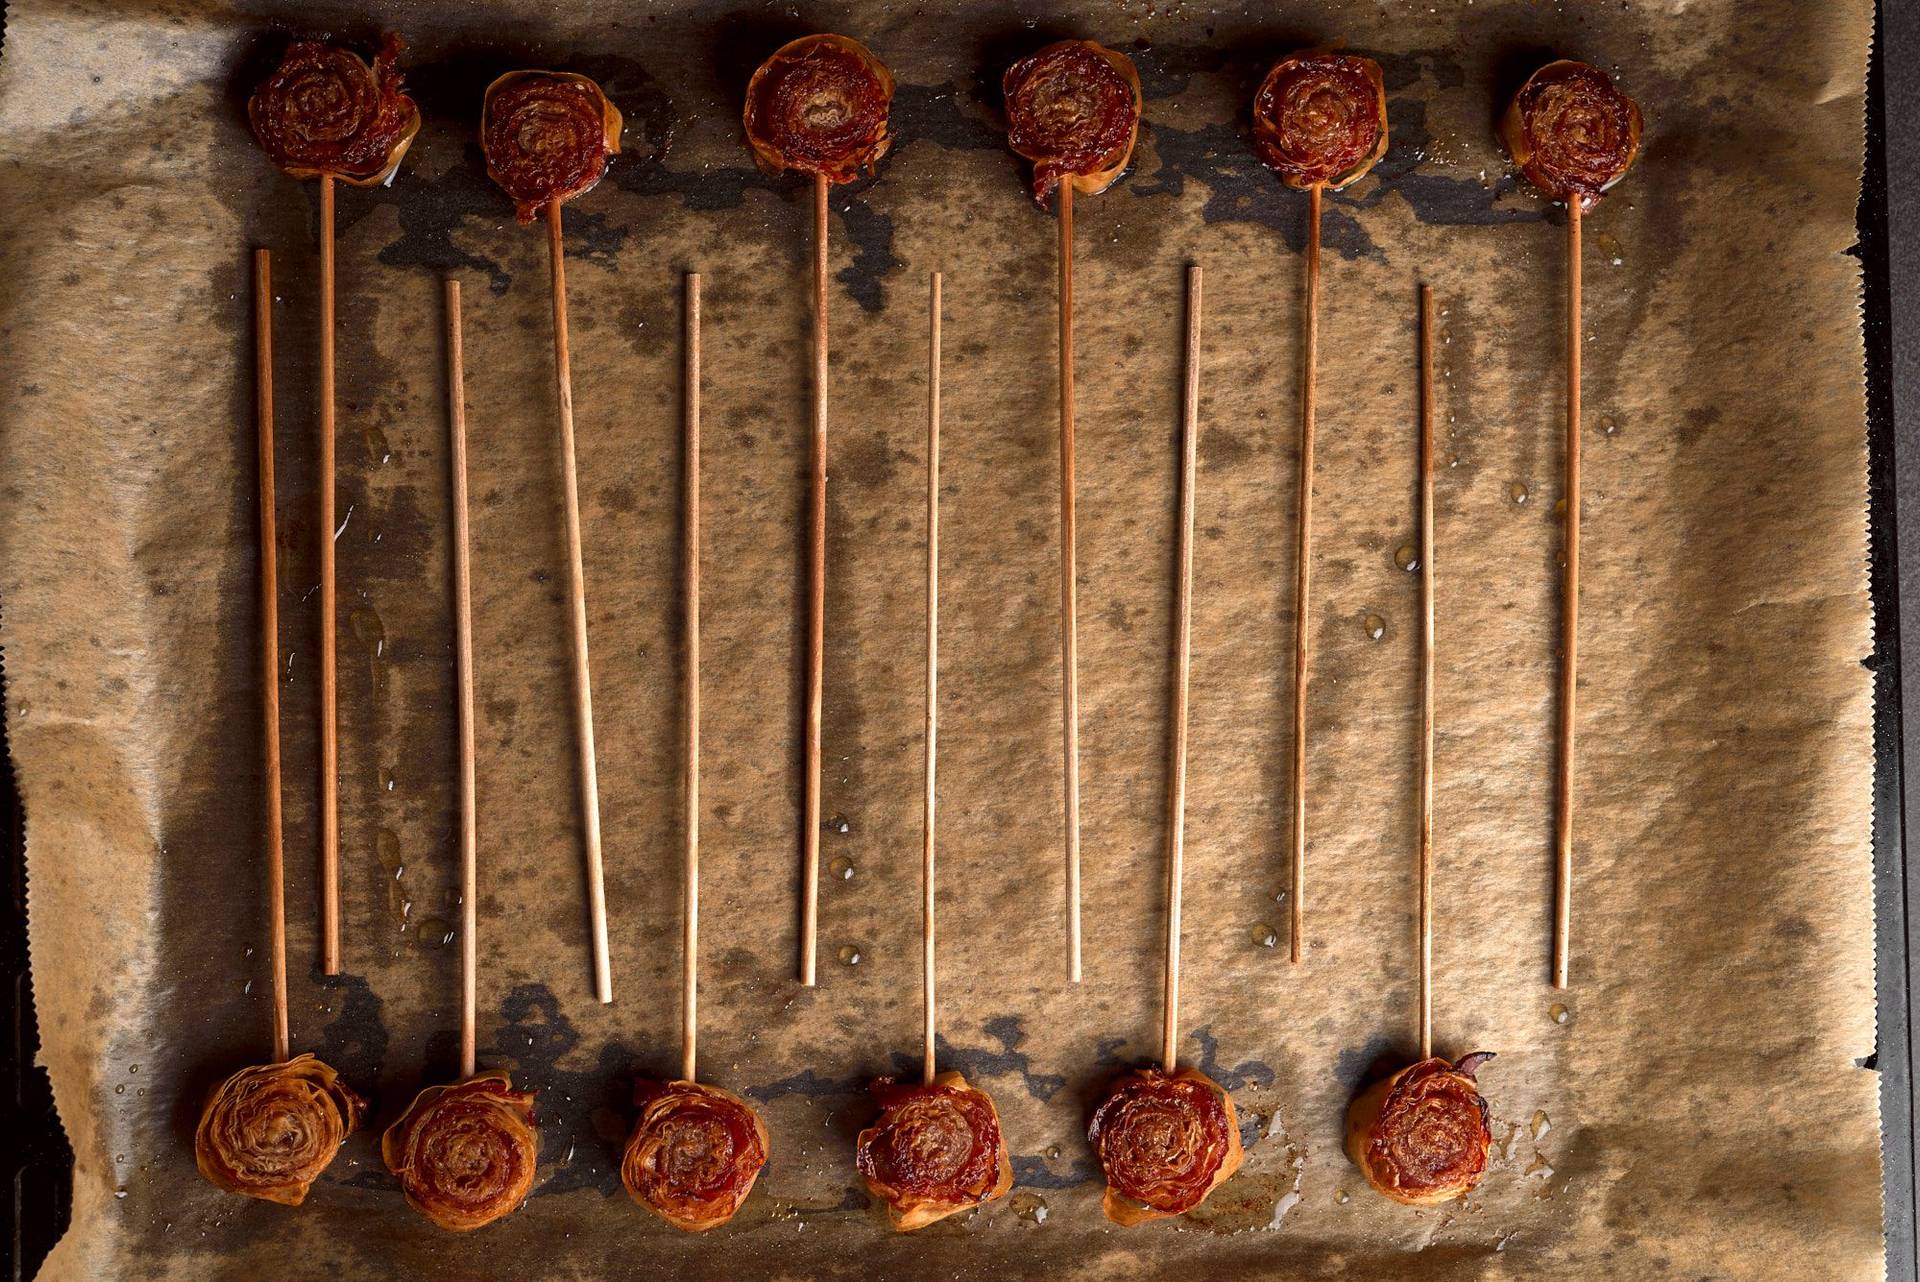 baked bacon and cinnamon lollipops on a baking sheet